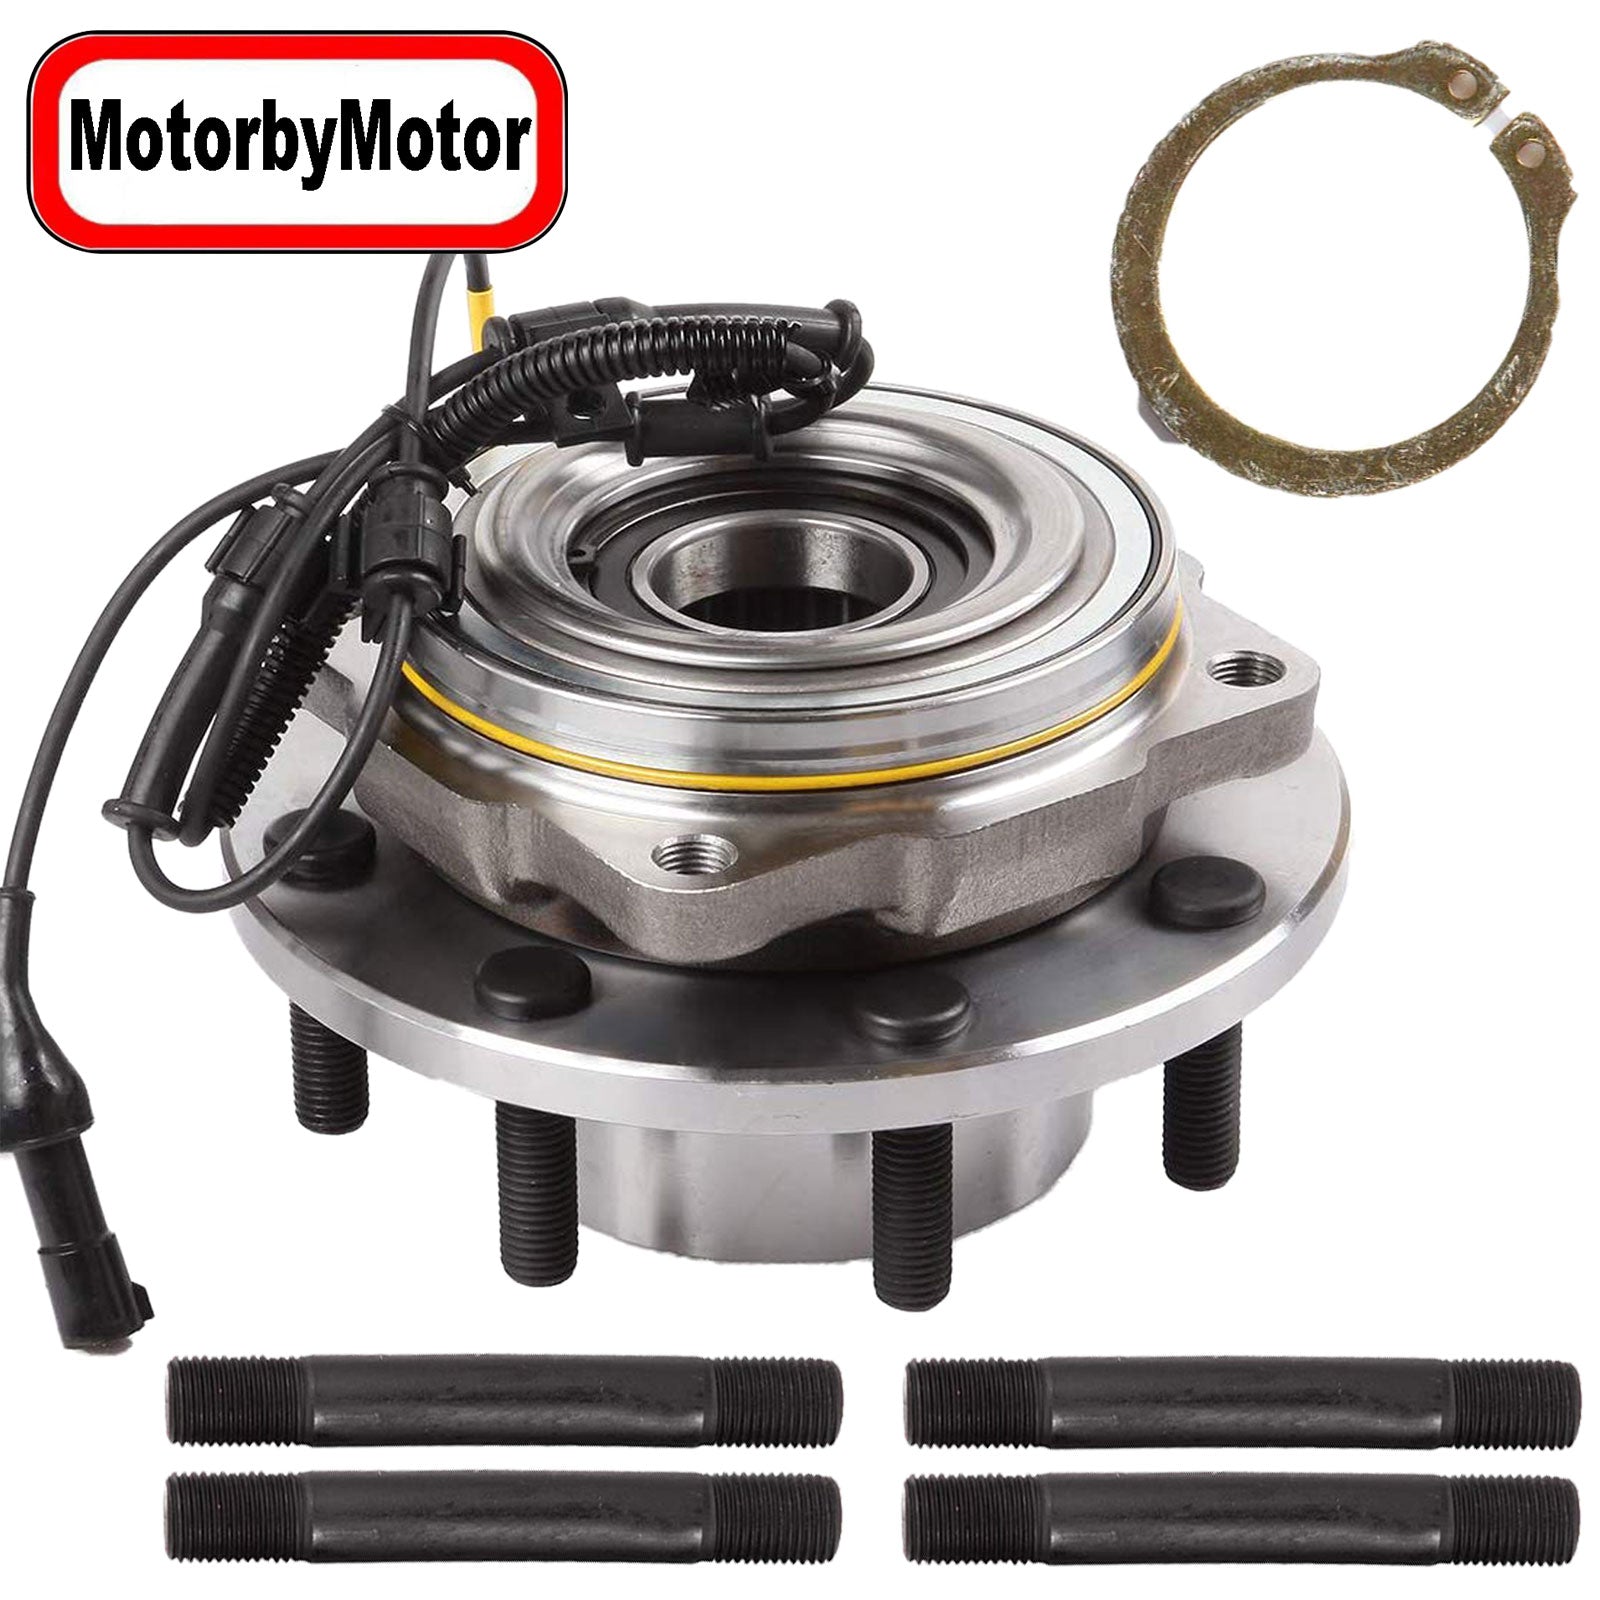 MotorbyMotor 515082 (4WD) Front Heavy Duty Wheel Bearing Assembly with 8 Lugs Fits for Ford F-250 F-350 Super Duty Wheel Bearing and Hub Assembly (w/ABS, DRW)-Dual Rear Wheels ONLY MotorbyMotor